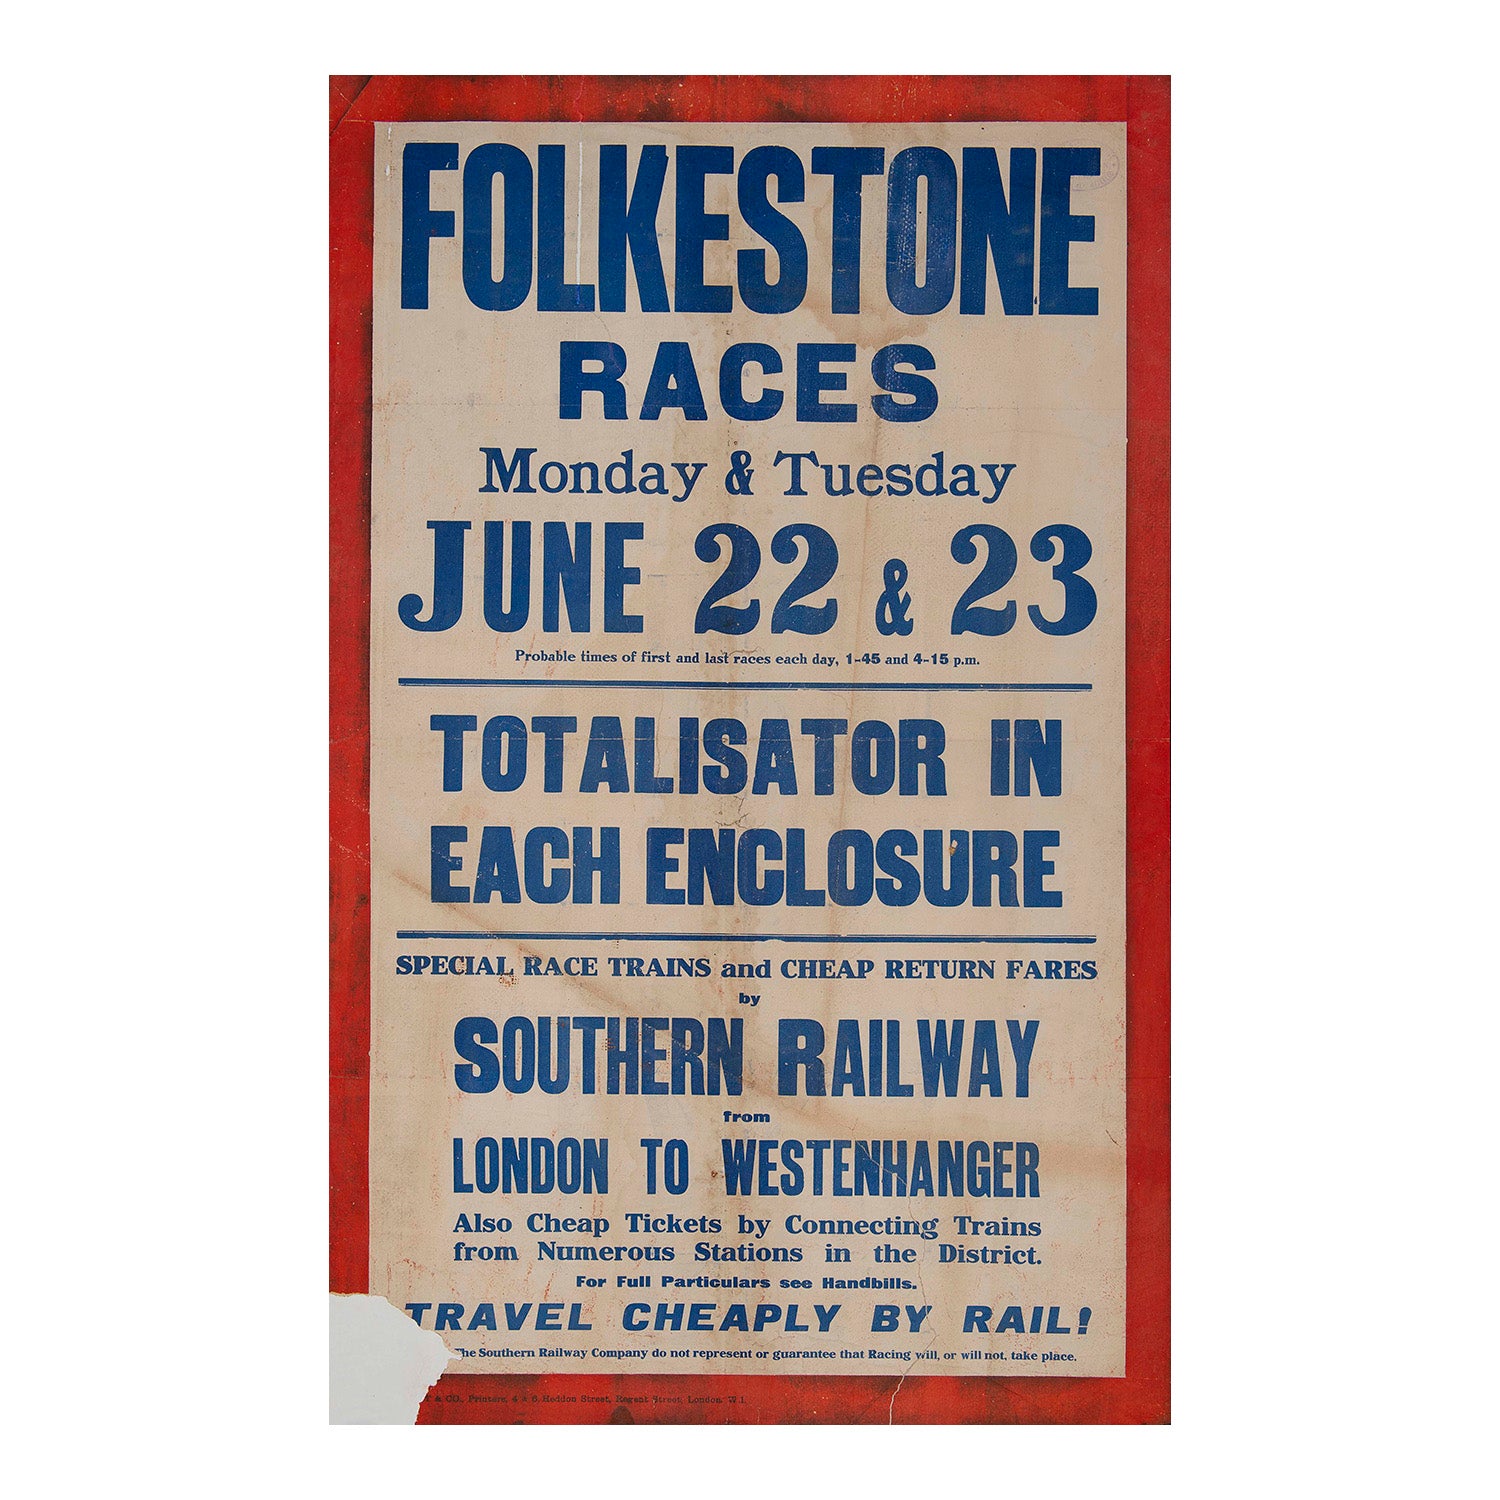 original Southern Railway letter press poster notice, Folkestone Races, 20-21 June. Special Race Trains and Cheap Return Fares by Southern Railway from London to Westernhanger, c.1931.